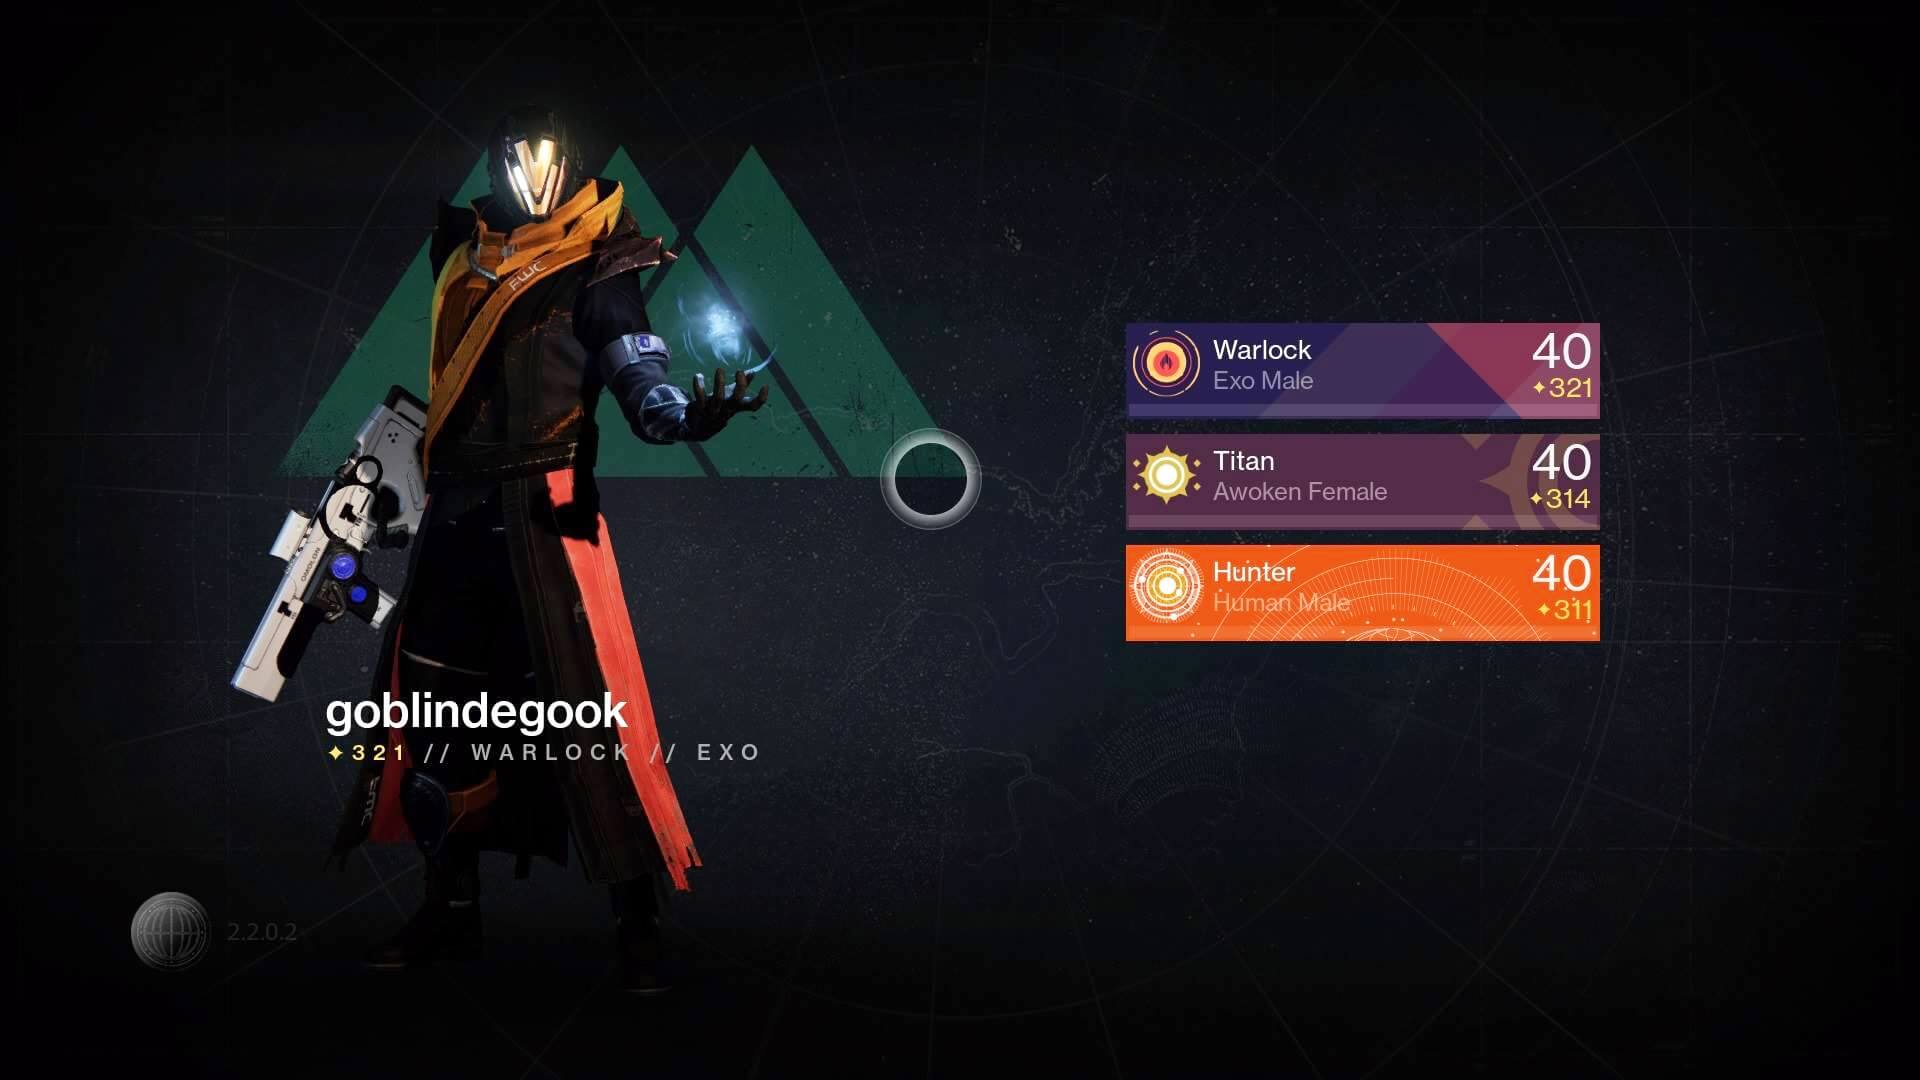 Destiny character selection screen showing my Warlock character.